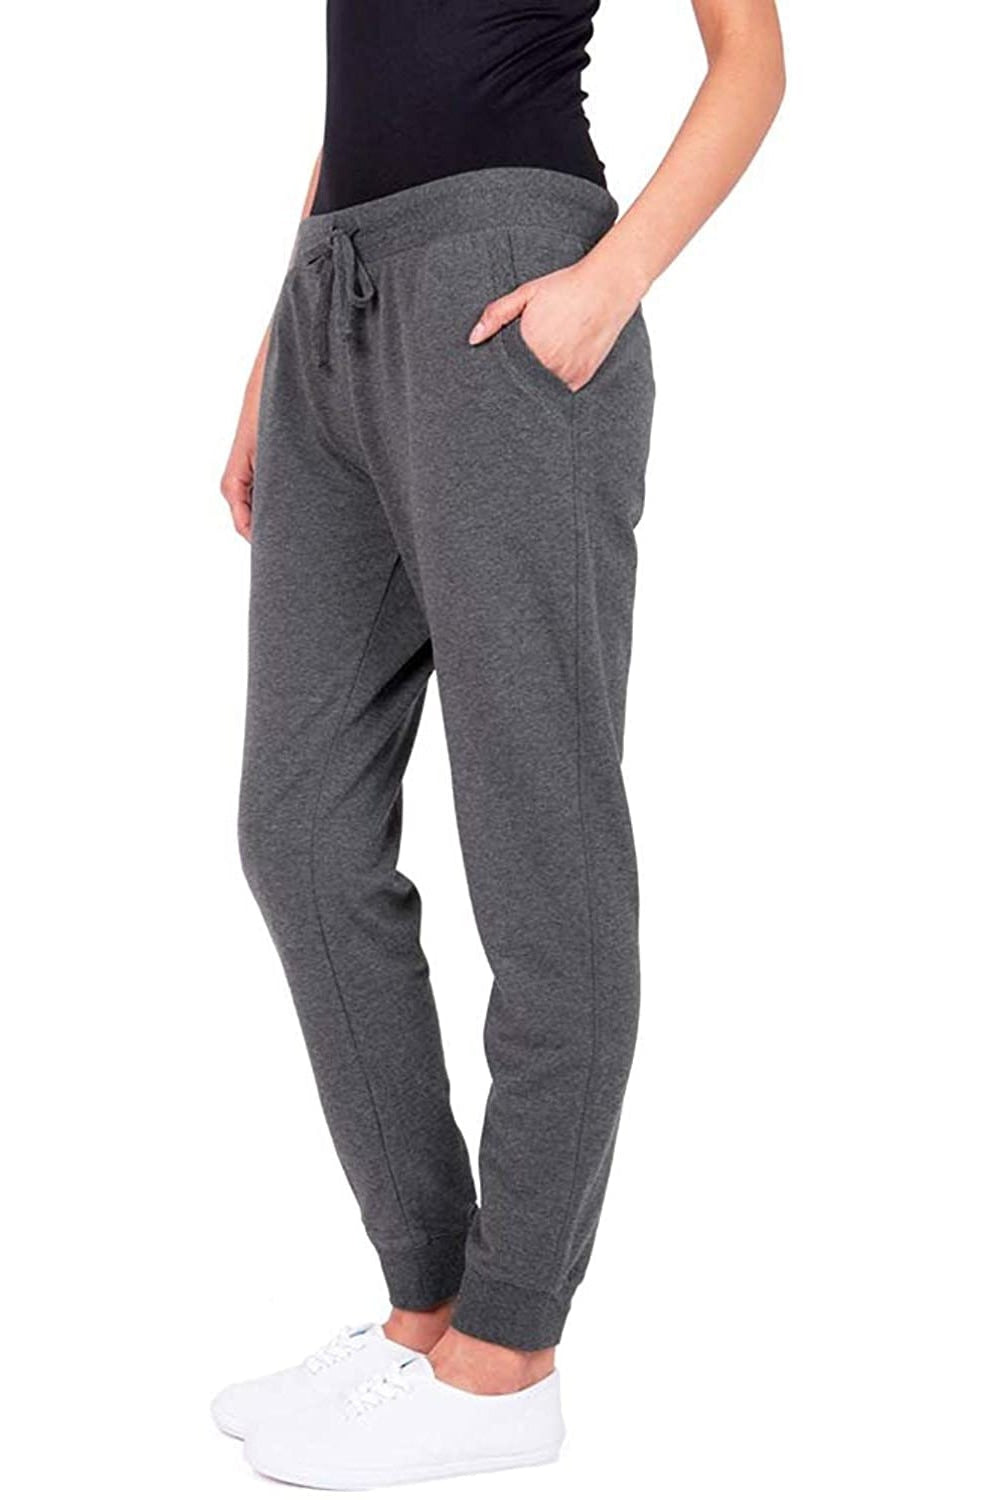 Better Bodies Empire Soft Joggers are flexible and comfortable with a  feminine look